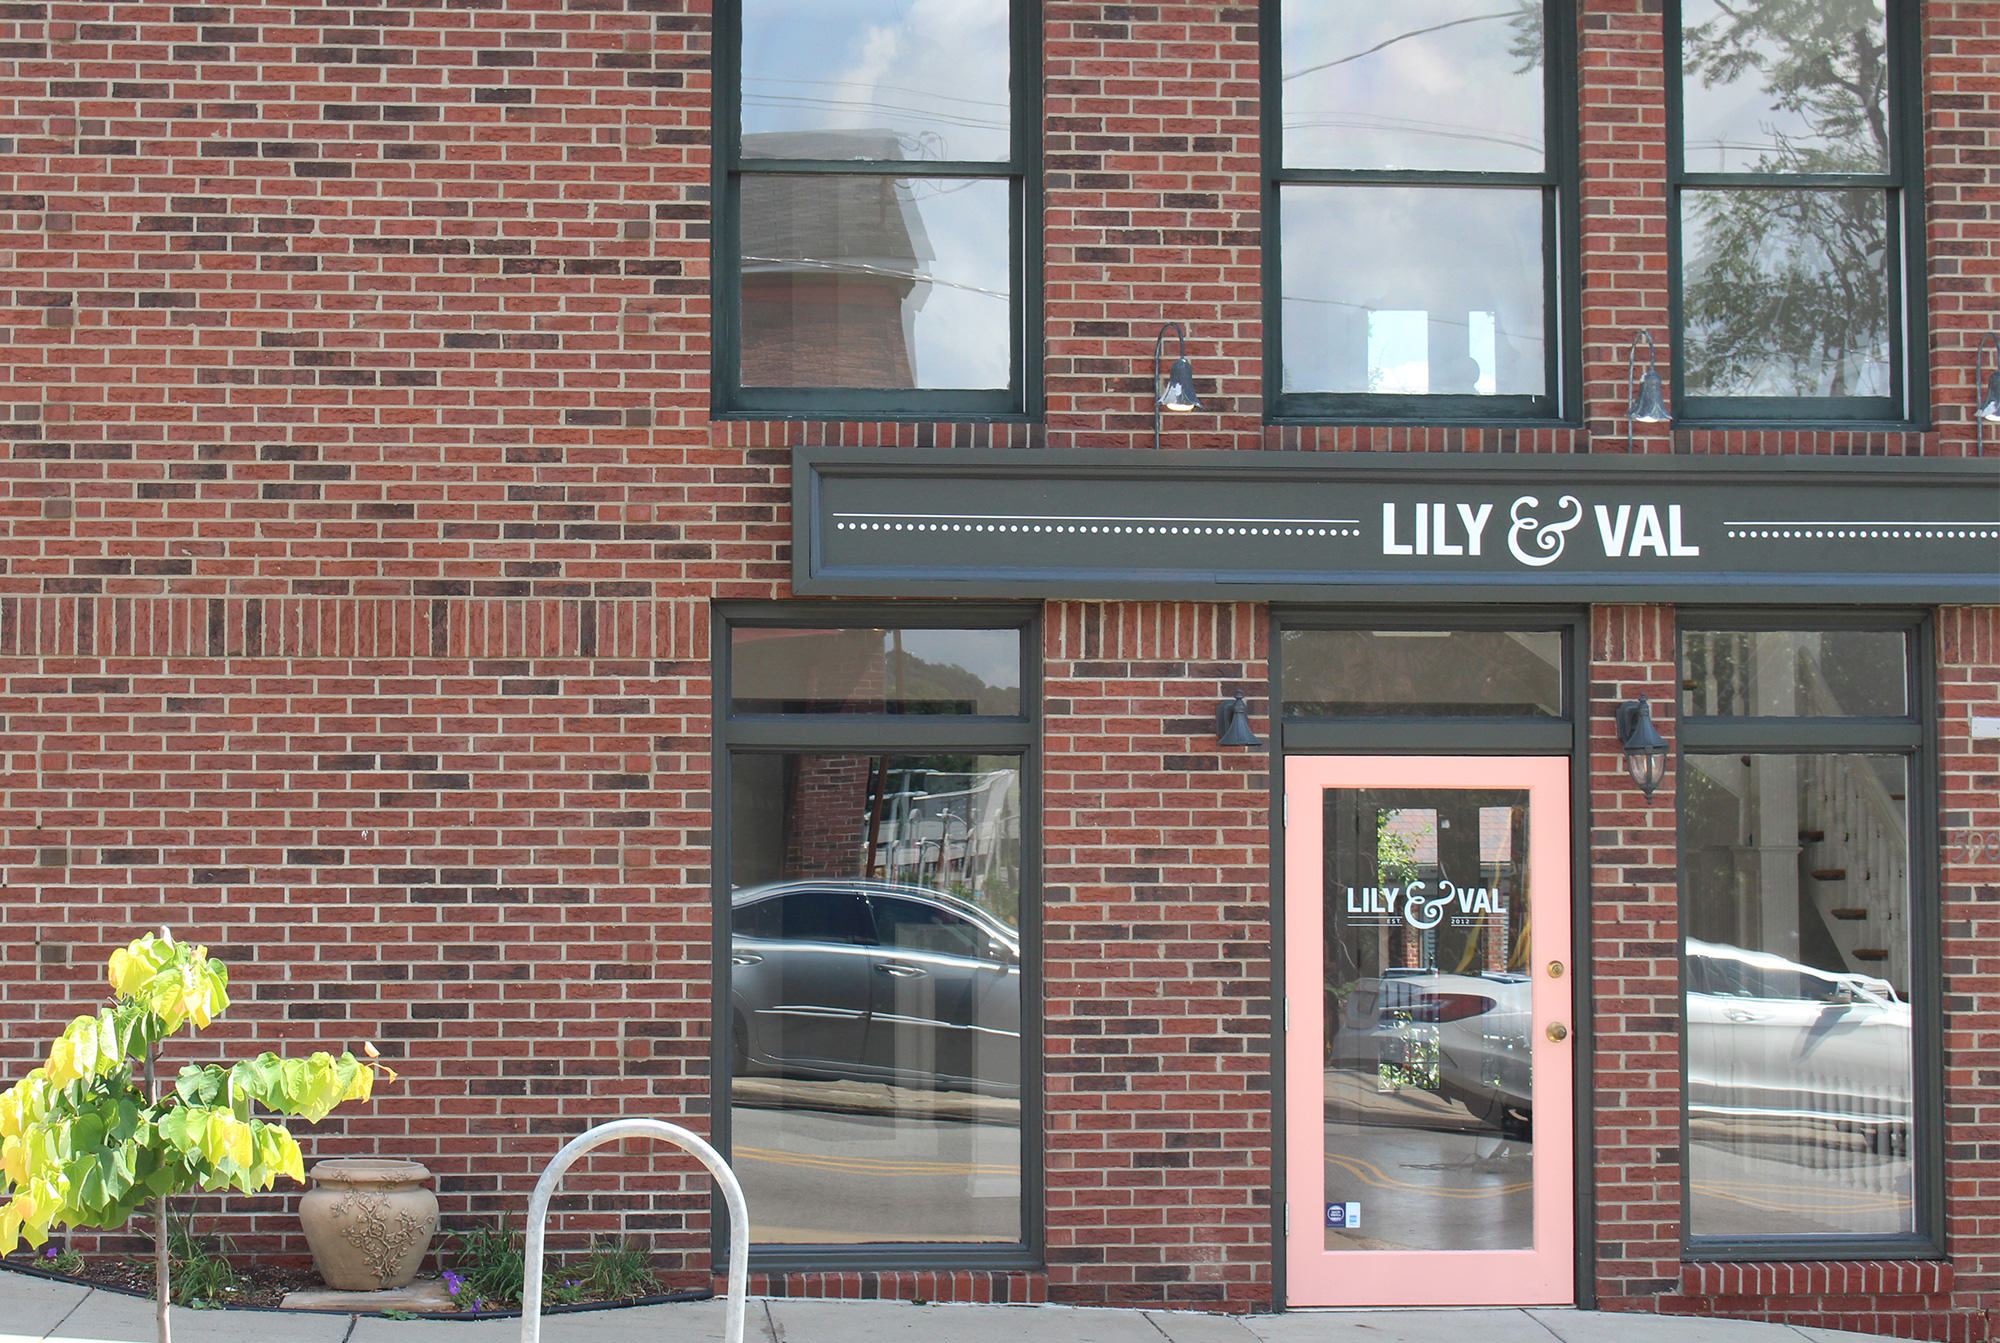 Introducing the new Lily & Val Corporate Headquarters and Flagship Store at 5900 Ellsworth Ave. Pittsburgh, PA